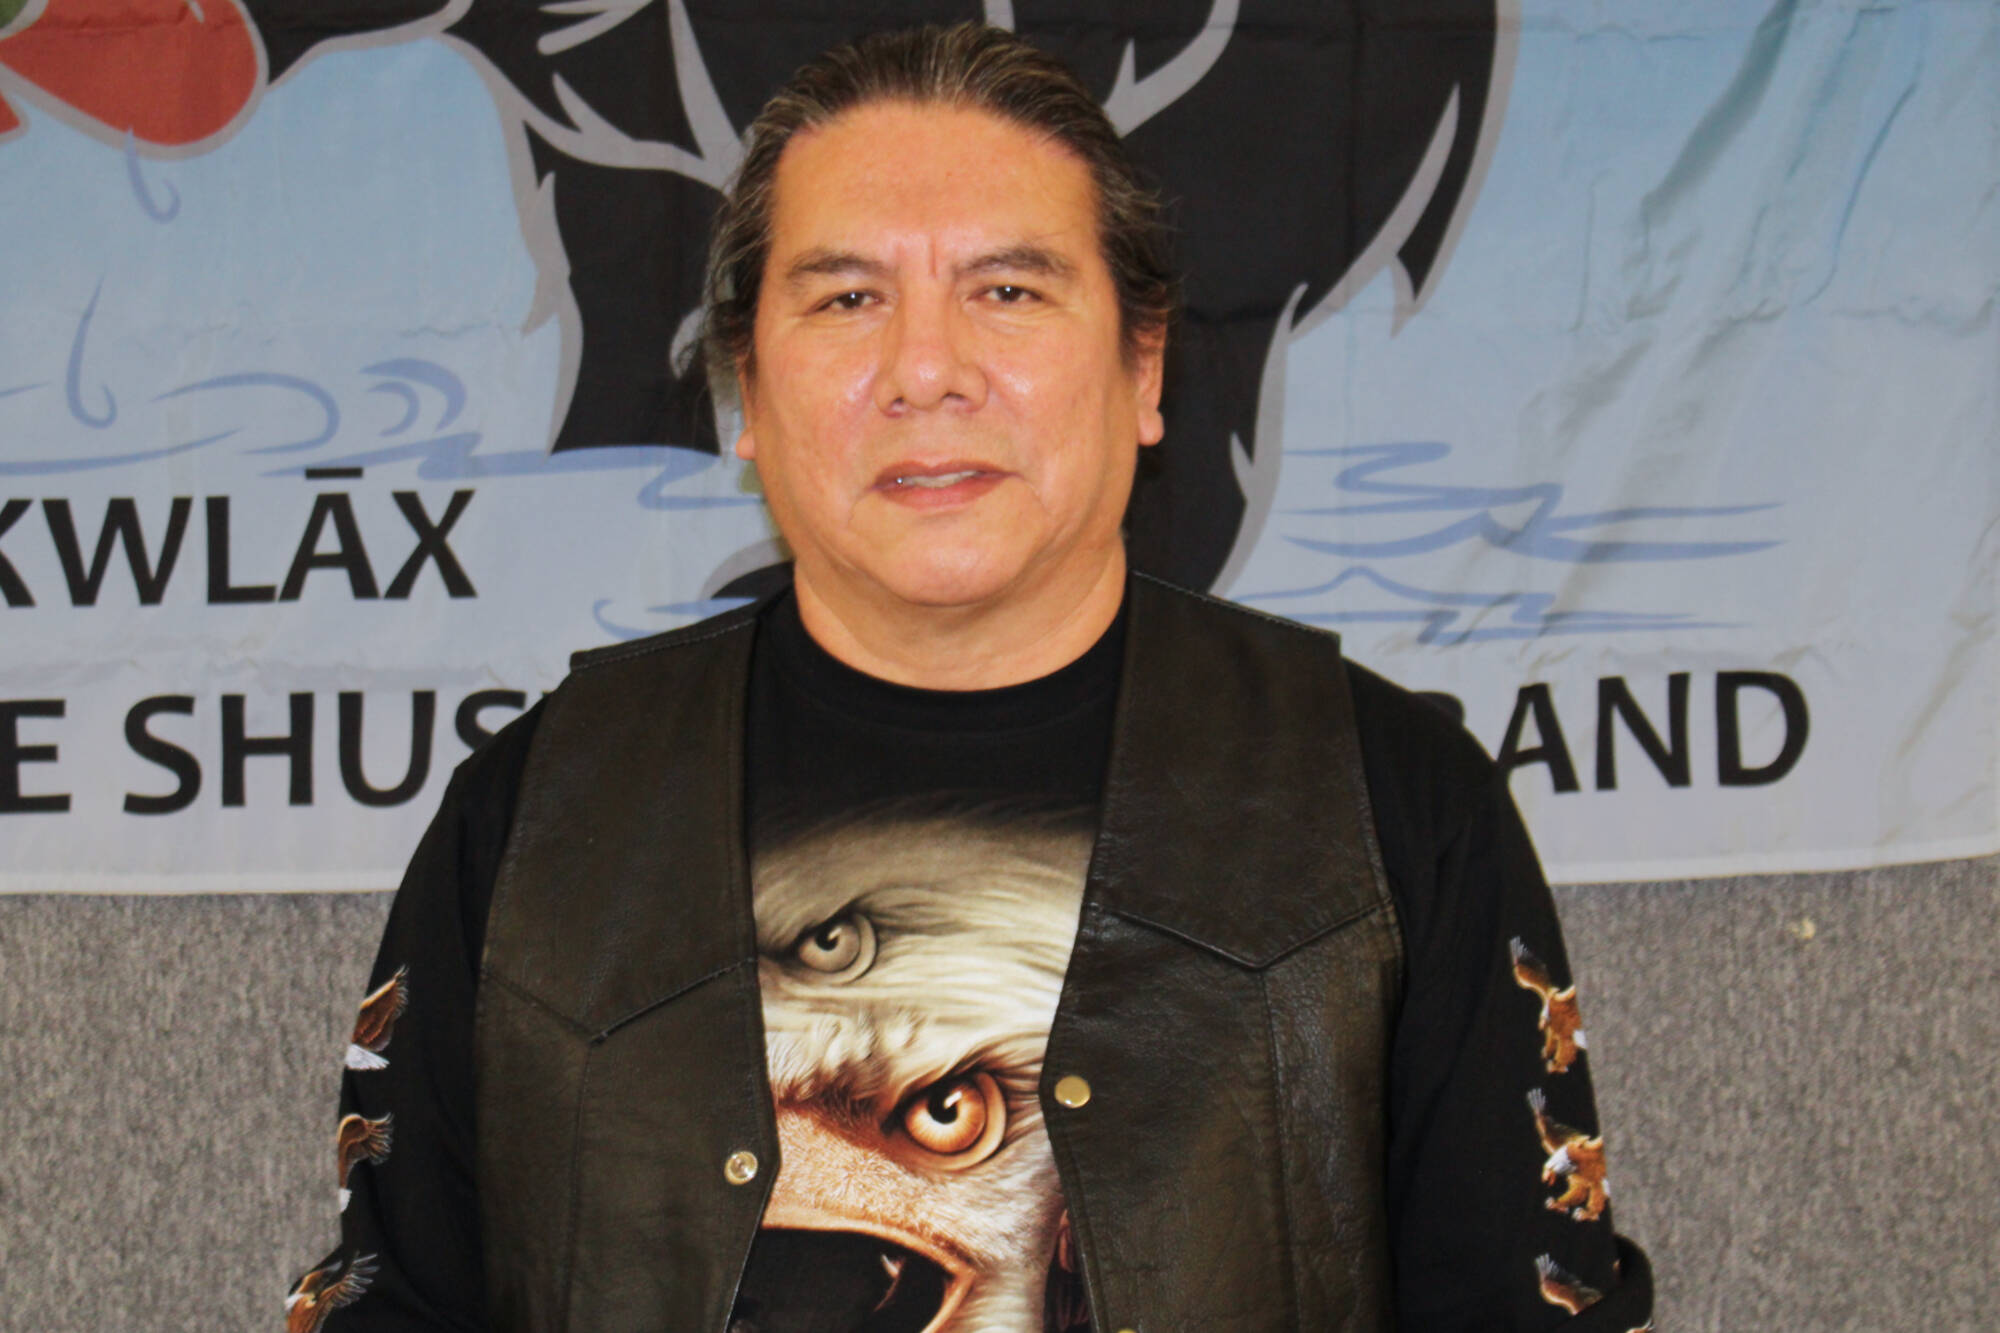 Kukpi7 (Chief) James Tomma is the new chief of the Little Shuswap Lake Band, declared elected on Dec. 1, 2021. (Contributed)